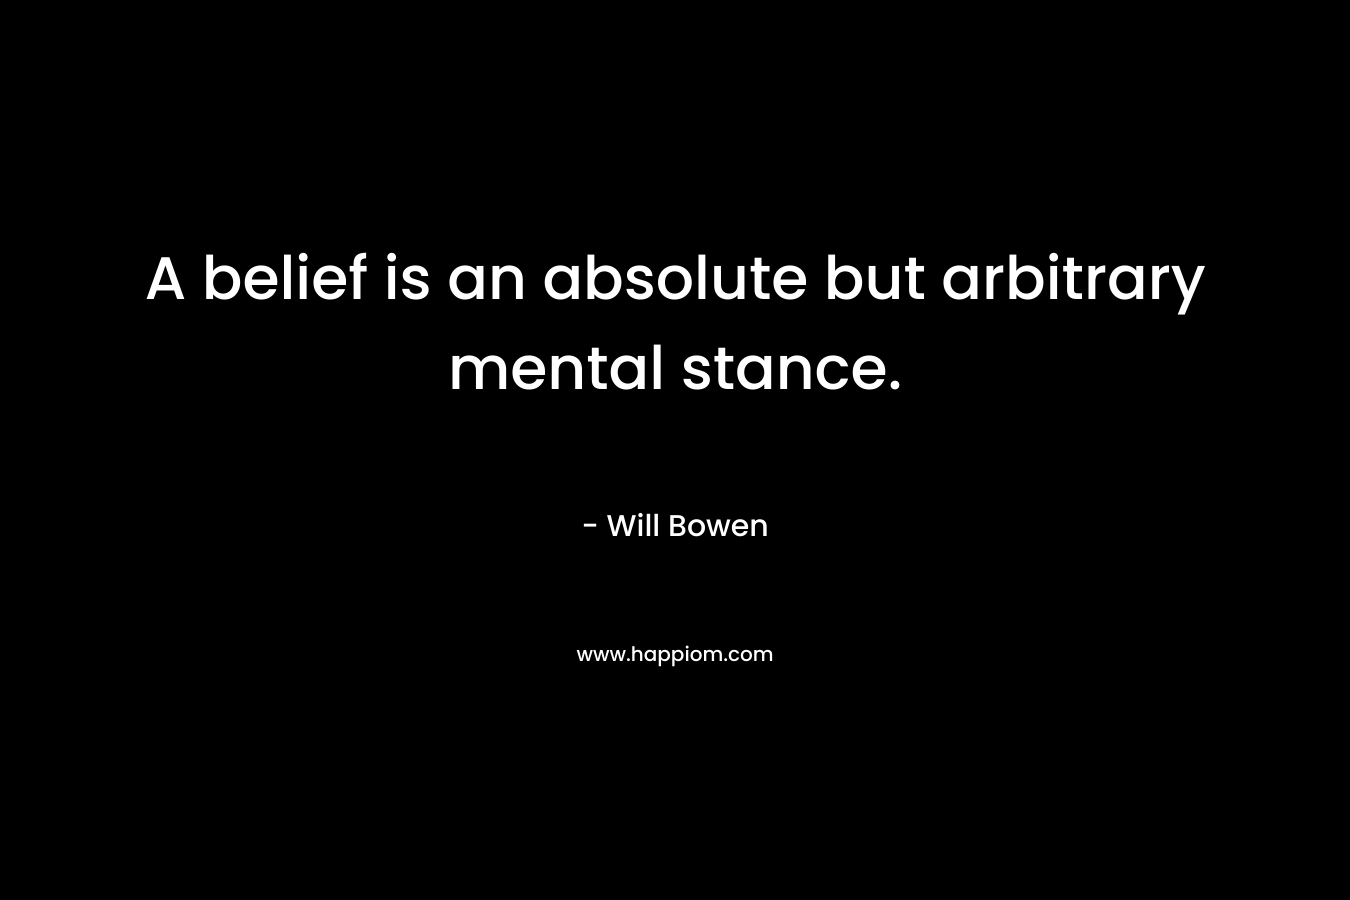 A belief is an absolute but arbitrary mental stance.